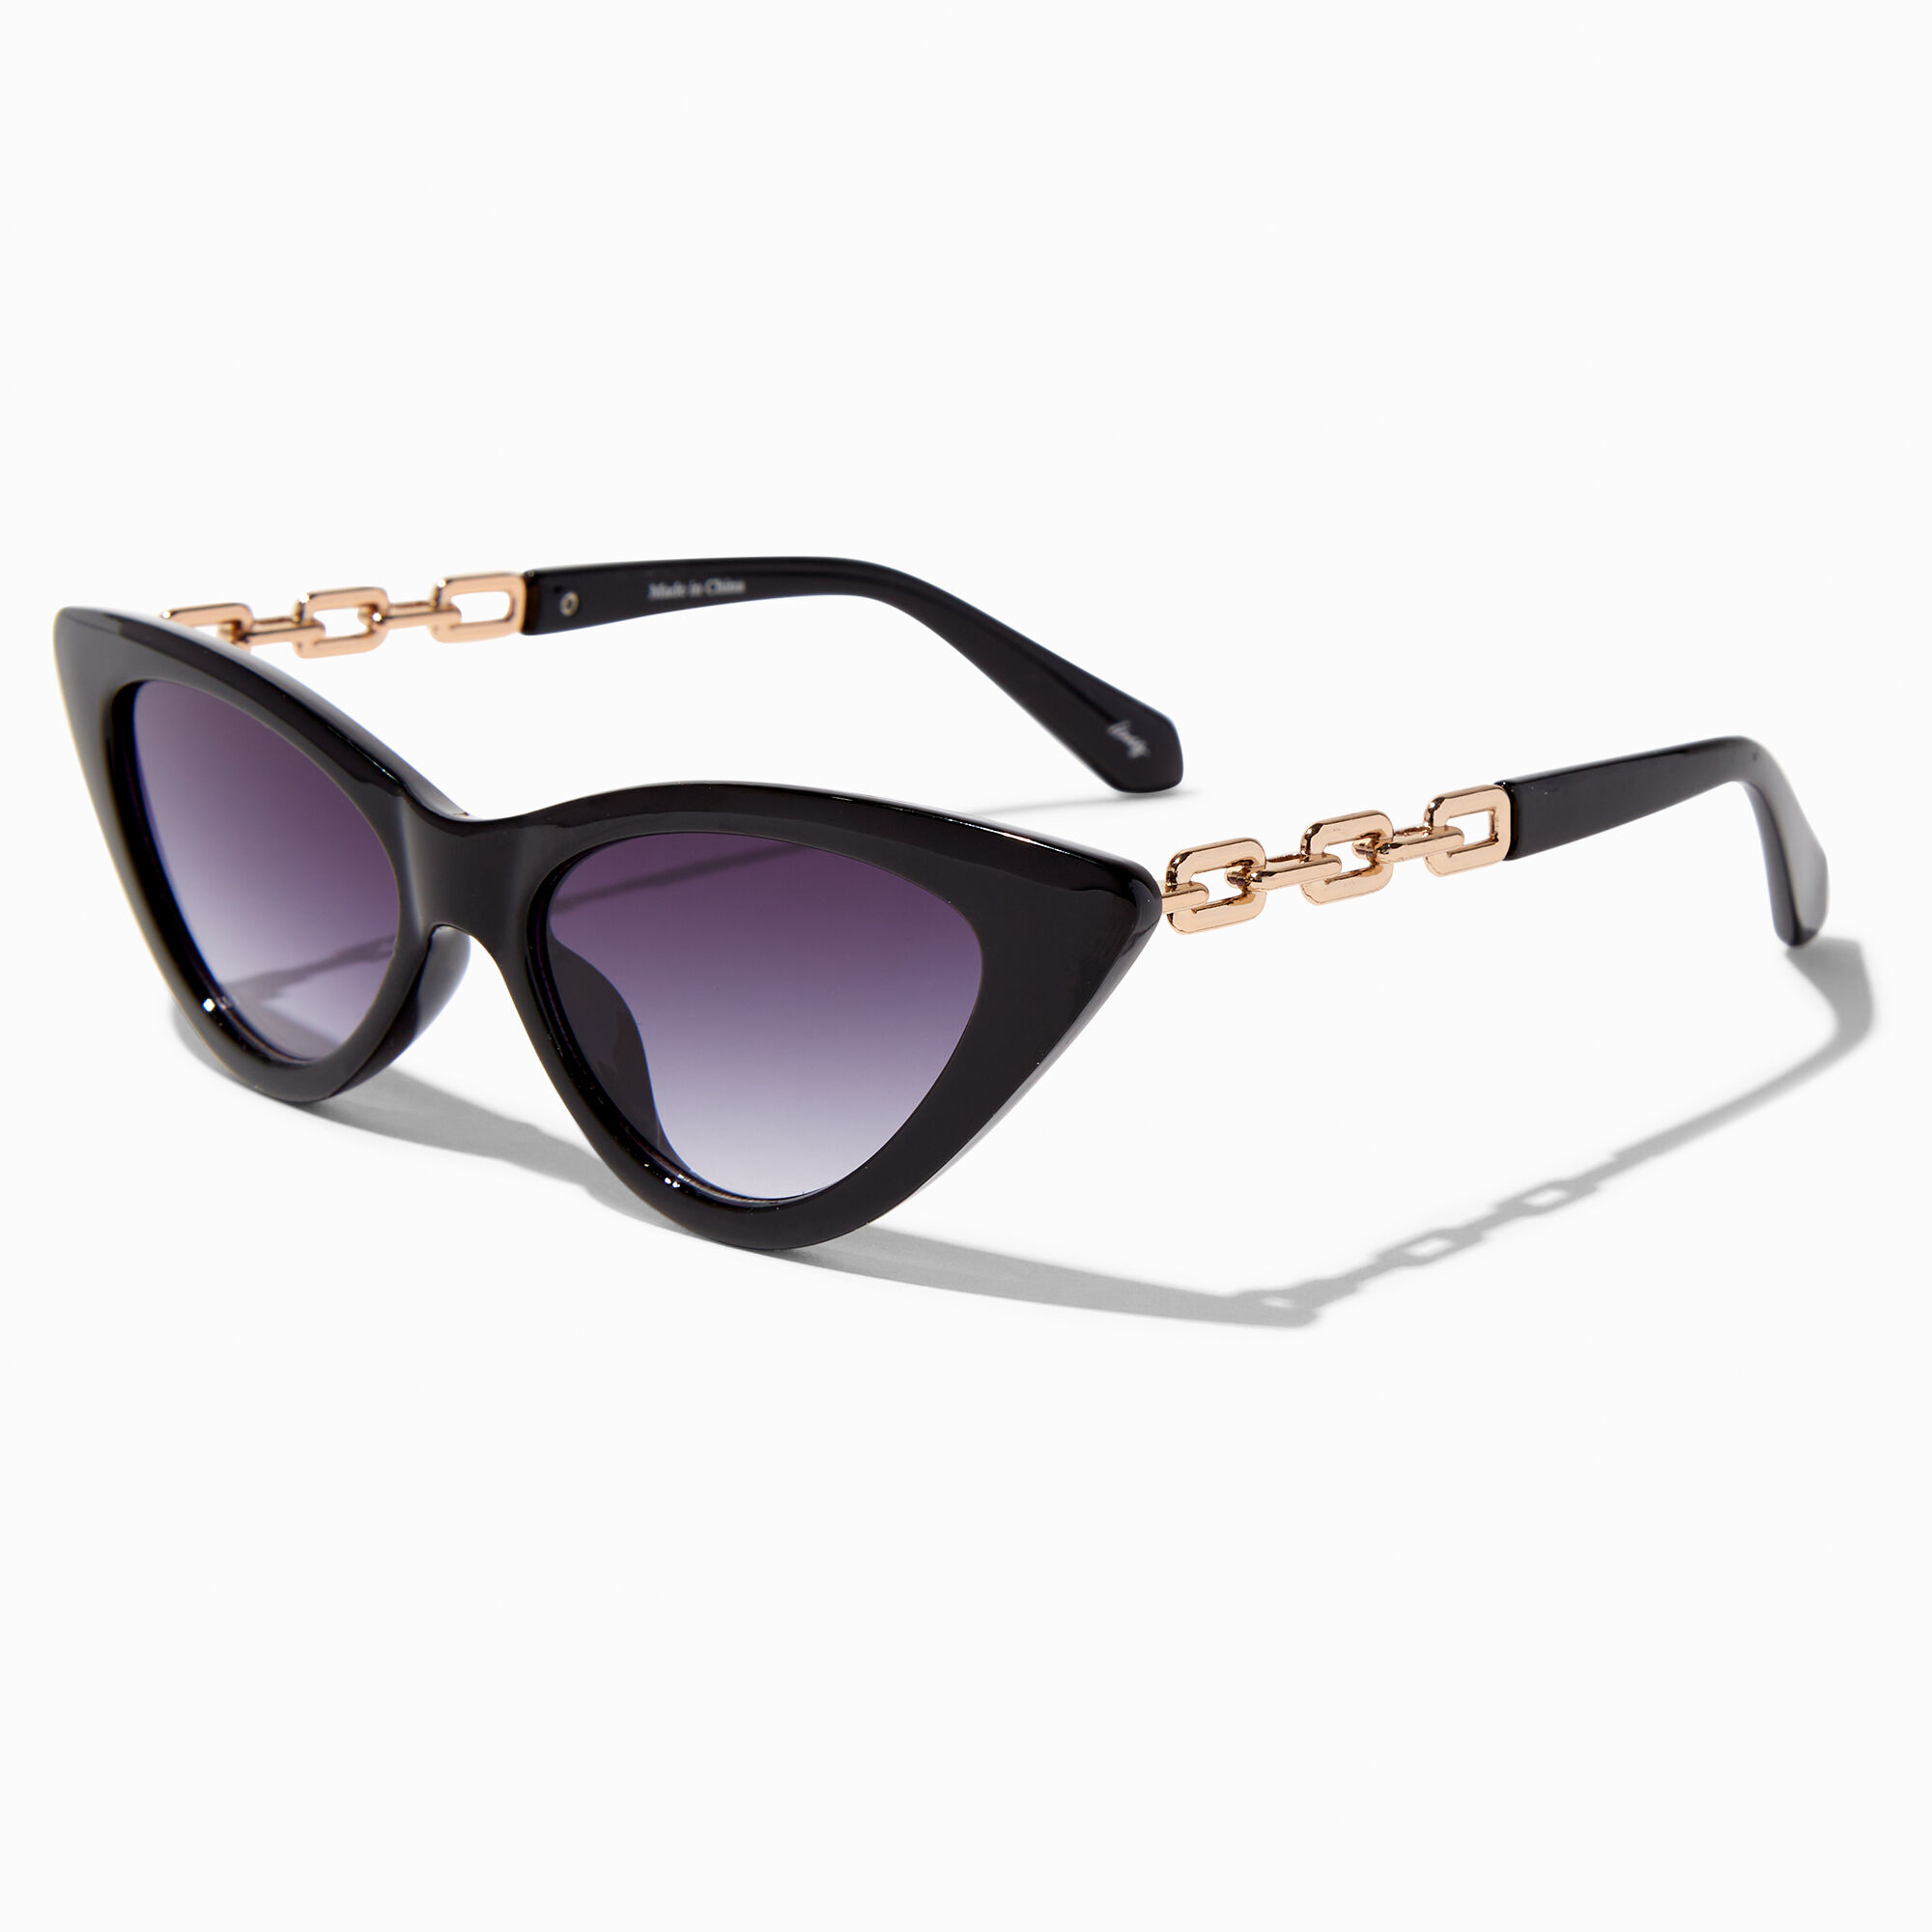 View Claires Chunky Cat Eye Gold Chain Link Sunglasses Black information